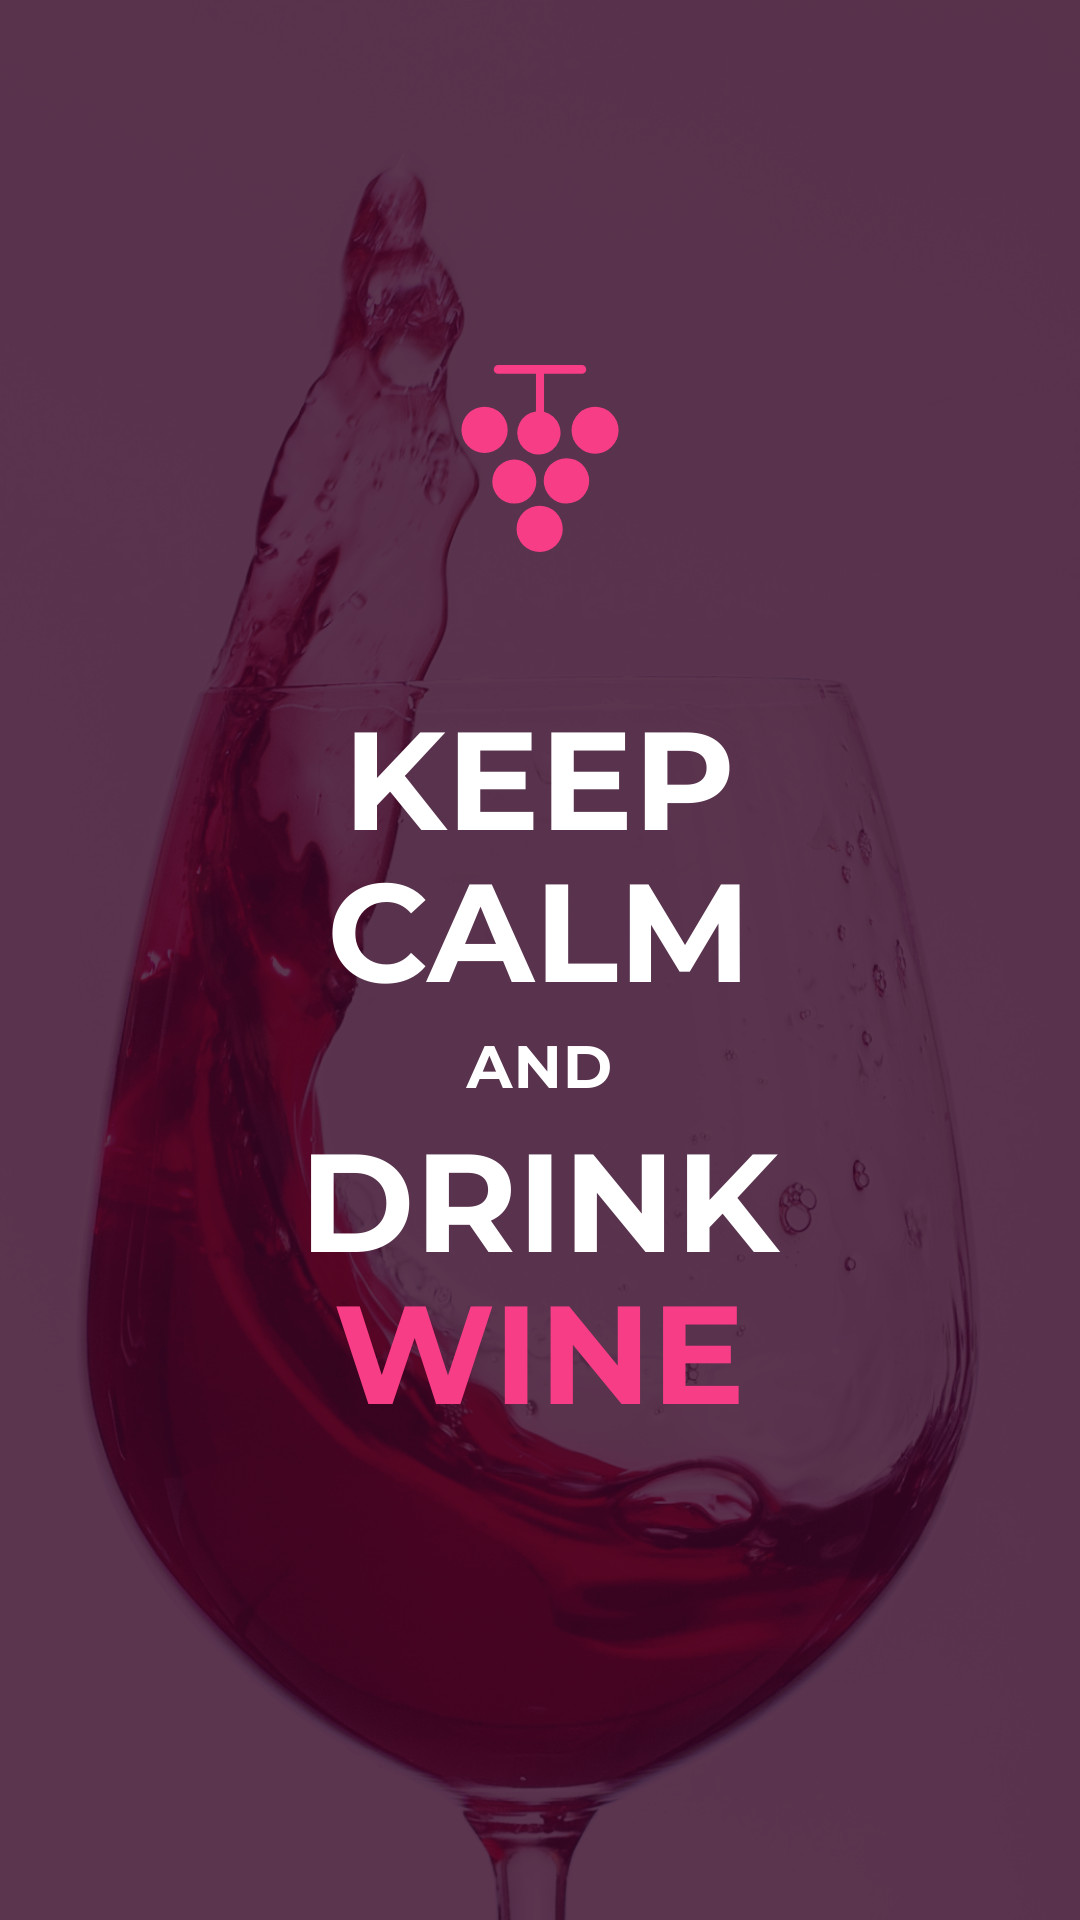 Keep Calm and Drink Wine Facebook Sponsored Message 1200x628